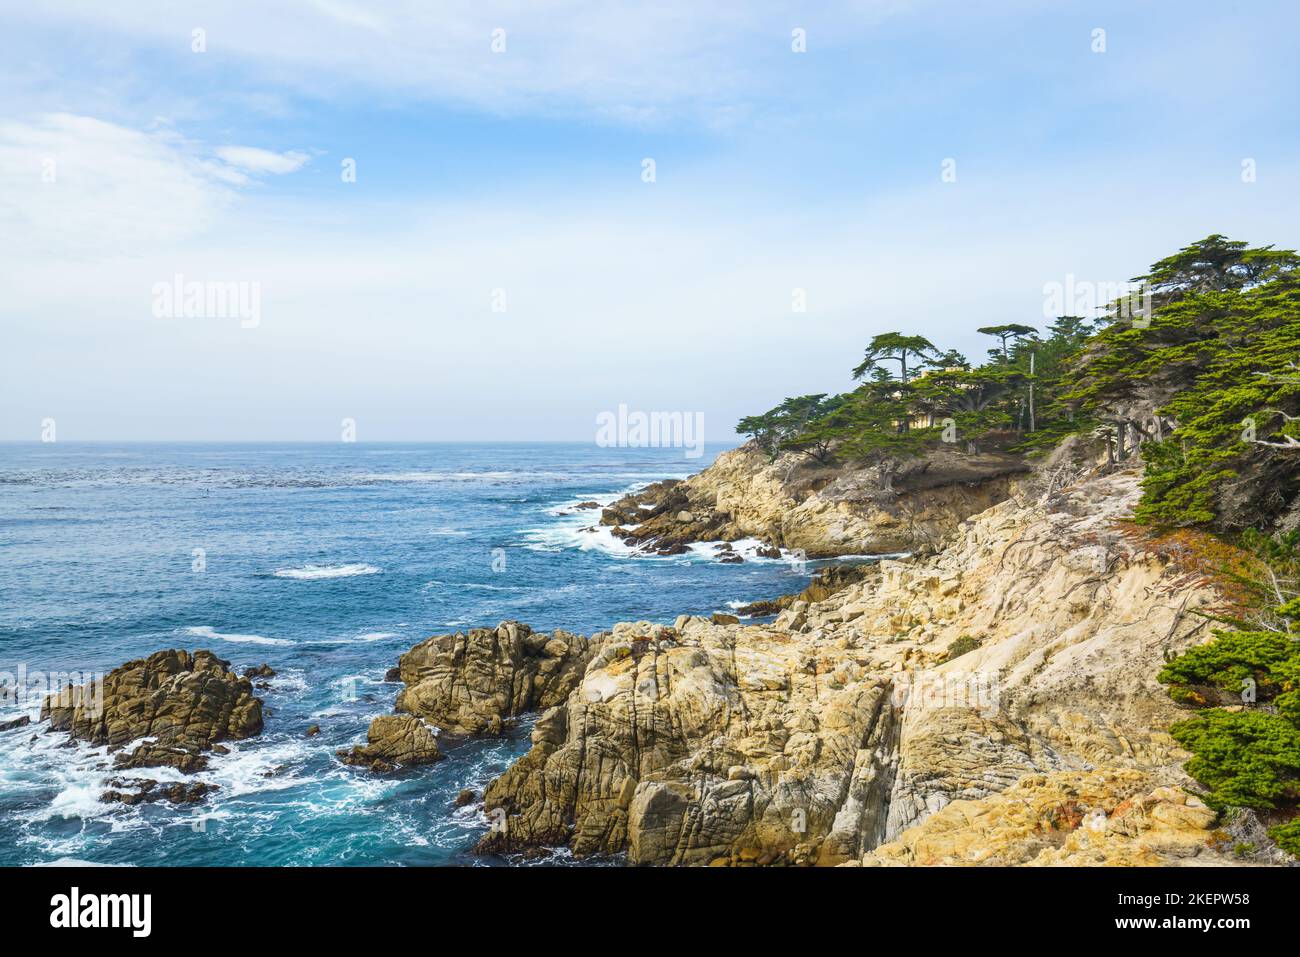 Monterey Bay, California. Rocky coastline, cypress trees, Pacific Ocean, and beautiful cloudy sky background Stock Photo